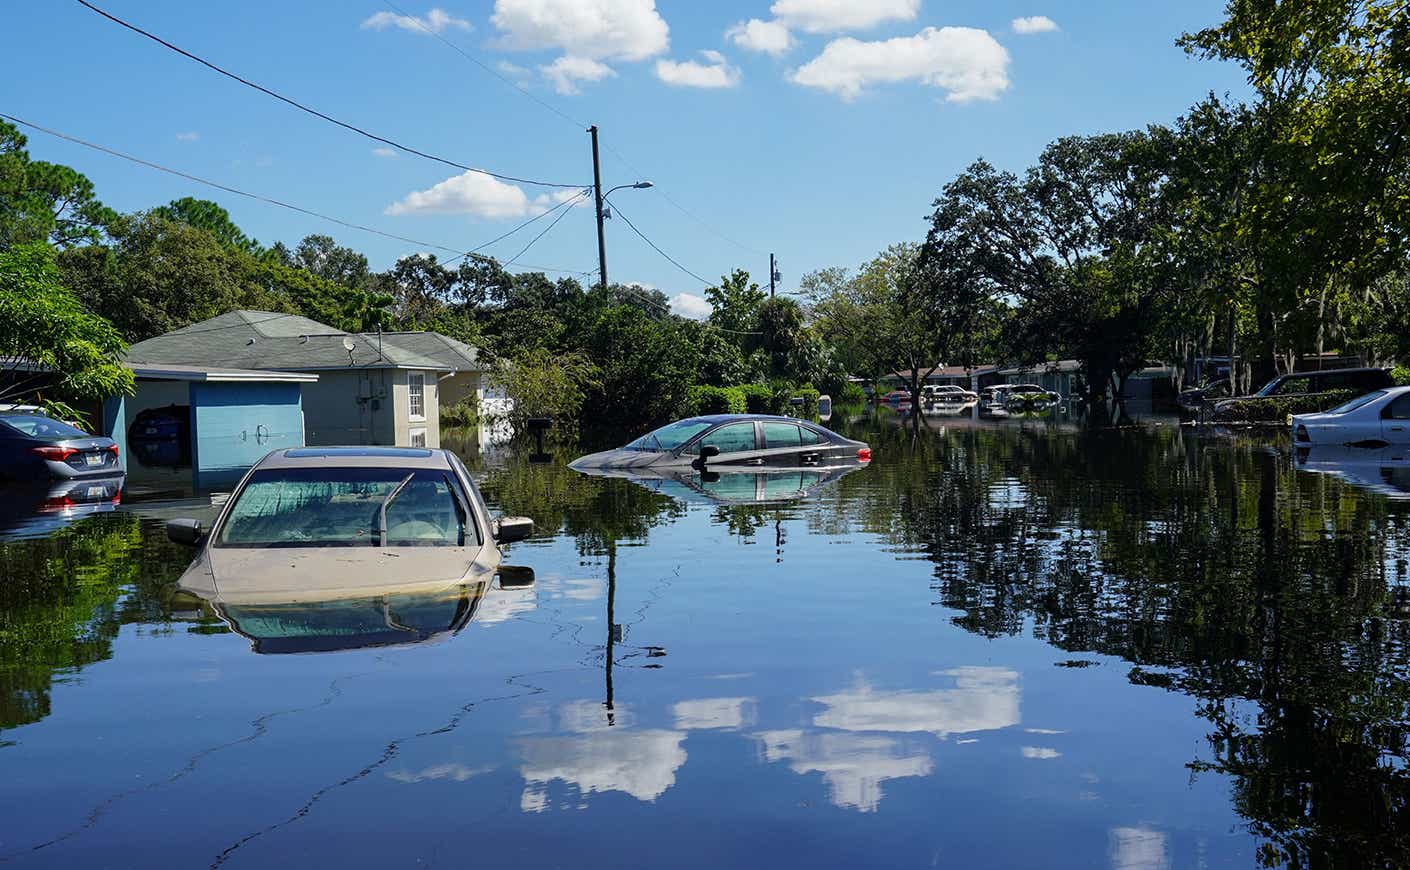 Aftermath of Hurricane Ian shows cars submerged in water